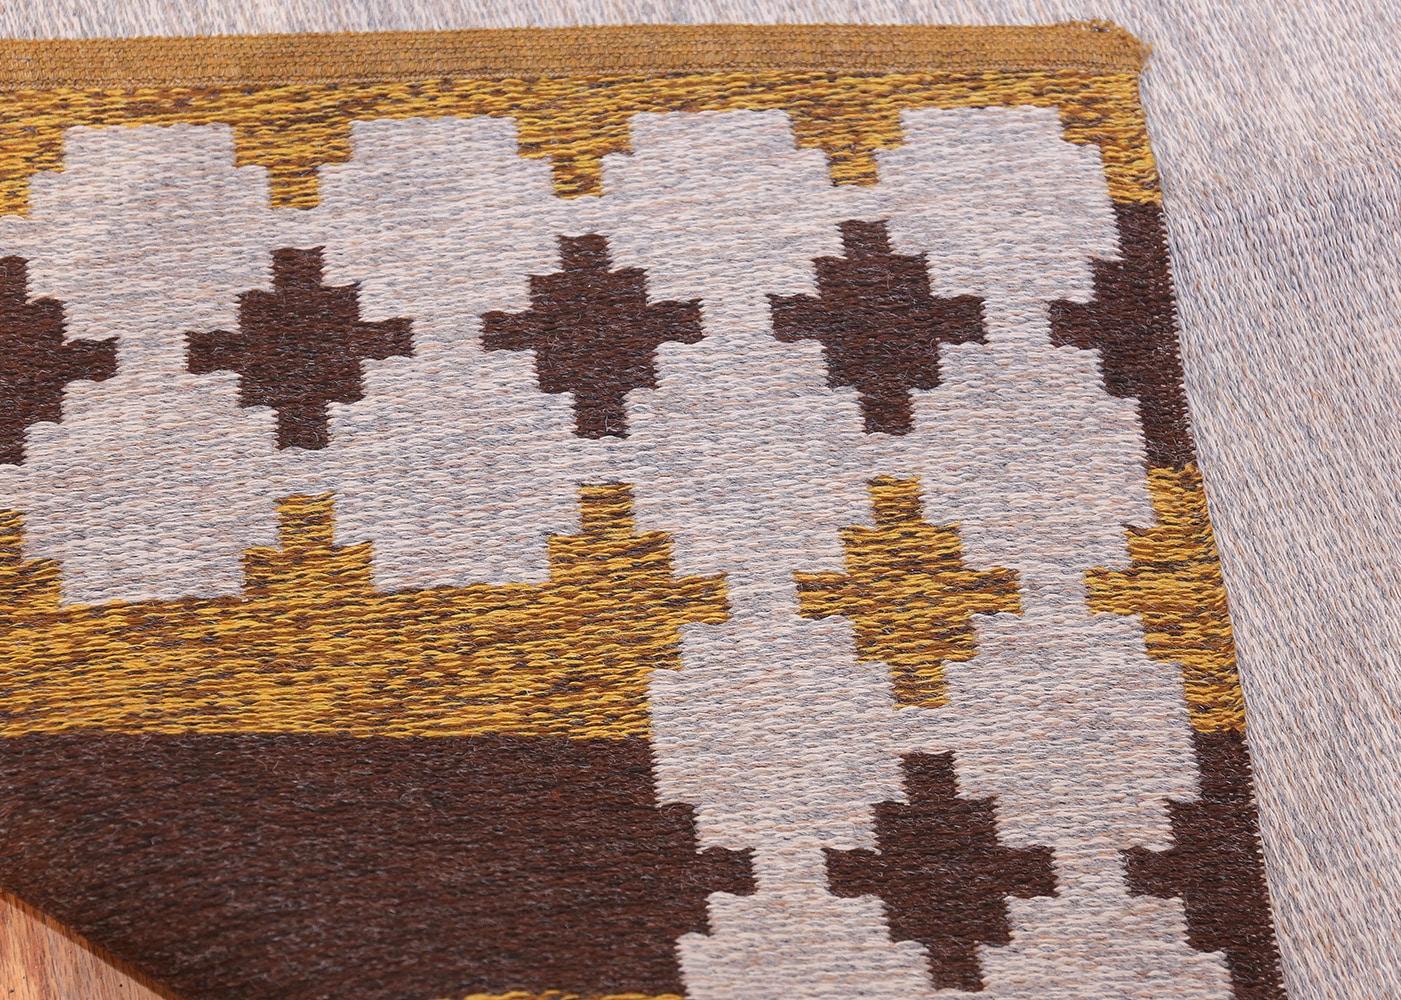 Vintage Mid-Century Modern Double Sided Kilim, Country of Origin: Sweden, Circa Date: Mid 20th Century. Size: 4 ft 6 in x 6 ft 8 in (1.37 m x 2.03 m)

